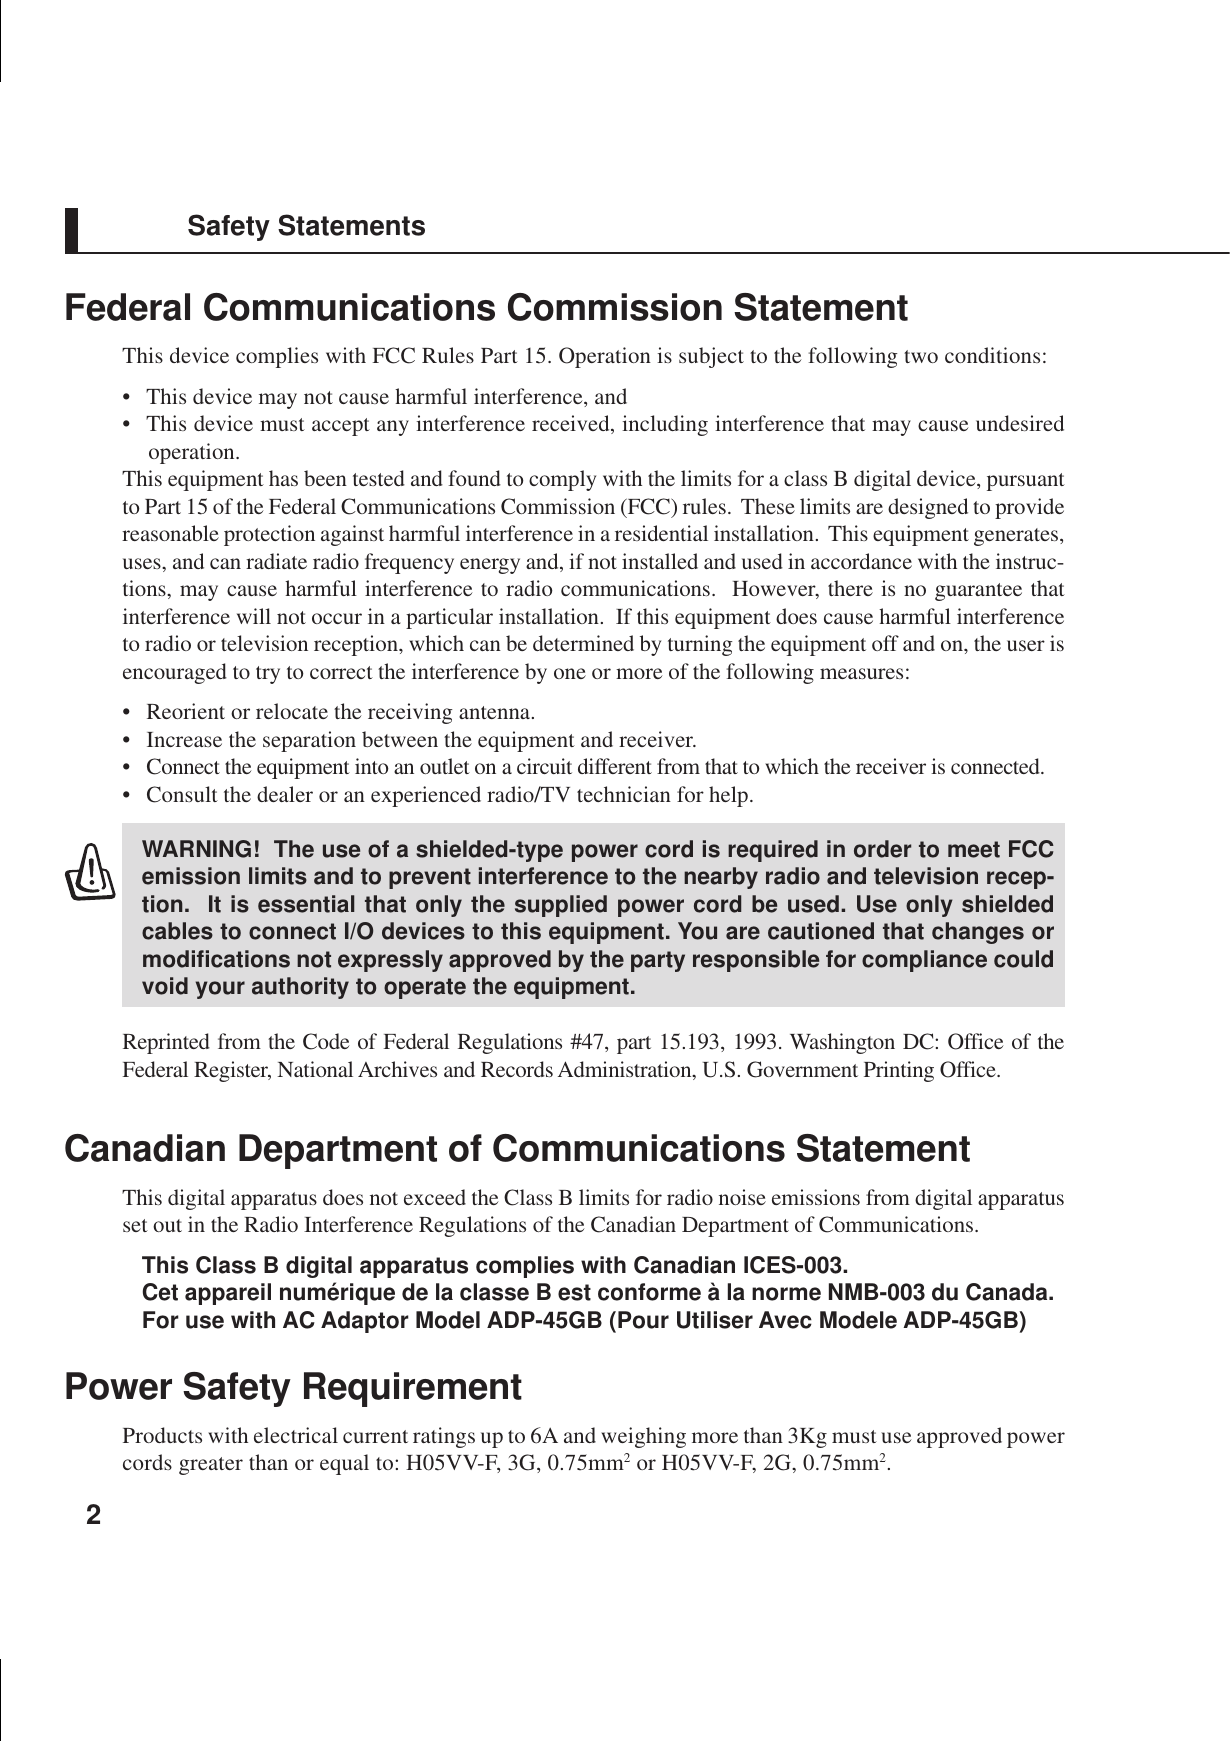 2Safety StatementsFederal Communications Commission StatementThis device complies with FCC Rules Part 15. Operation is subject to the following two conditions:• This device may not cause harmful interference, and• This device must accept any interference received, including interference that may cause undesiredoperation.This equipment has been tested and found to comply with the limits for a class B digital device, pursuantto Part 15 of the Federal Communications Commission (FCC) rules.  These limits are designed to providereasonable protection against harmful interference in a residential installation.  This equipment generates,uses, and can radiate radio frequency energy and, if not installed and used in accordance with the instruc-tions, may cause harmful interference to radio communications.  However, there is no guarantee thatinterference will not occur in a particular installation.  If this equipment does cause harmful interferenceto radio or television reception, which can be determined by turning the equipment off and on, the user isencouraged to try to correct the interference by one or more of the following measures:• Reorient or relocate the receiving antenna.• Increase the separation between the equipment and receiver.• Connect the equipment into an outlet on a circuit different from that to which the receiver is connected.• Consult the dealer or an experienced radio/TV technician for help.WARNING!  The use of a shielded-type power cord is required in order to meet FCCemission limits and to prevent interference to the nearby radio and television recep-tion.  It is essential that only the supplied power cord be used. Use only shieldedcables to connect I/O devices to this equipment. You are cautioned that changes ormodifications not expressly approved by the party responsible for compliance couldvoid your authority to operate the equipment.Reprinted from the Code of Federal Regulations #47, part 15.193, 1993. Washington DC: Office of theFederal Register, National Archives and Records Administration, U.S. Government Printing Office.Canadian Department of Communications StatementThis digital apparatus does not exceed the Class B limits for radio noise emissions from digital apparatusset out in the Radio Interference Regulations of the Canadian Department of Communications.This Class B digital apparatus complies with Canadian ICES-003.Cet appareil numérique de la classe B est conforme à la norme NMB-003 du Canada.For use with AC Adaptor Model ADP-45GB (Pour Utiliser Avec Modele ADP-45GB)Power Safety RequirementProducts with electrical current ratings up to 6A and weighing more than 3Kg must use approved powercords greater than or equal to: H05VV-F, 3G, 0.75mm2 or H05VV-F, 2G, 0.75mm2.